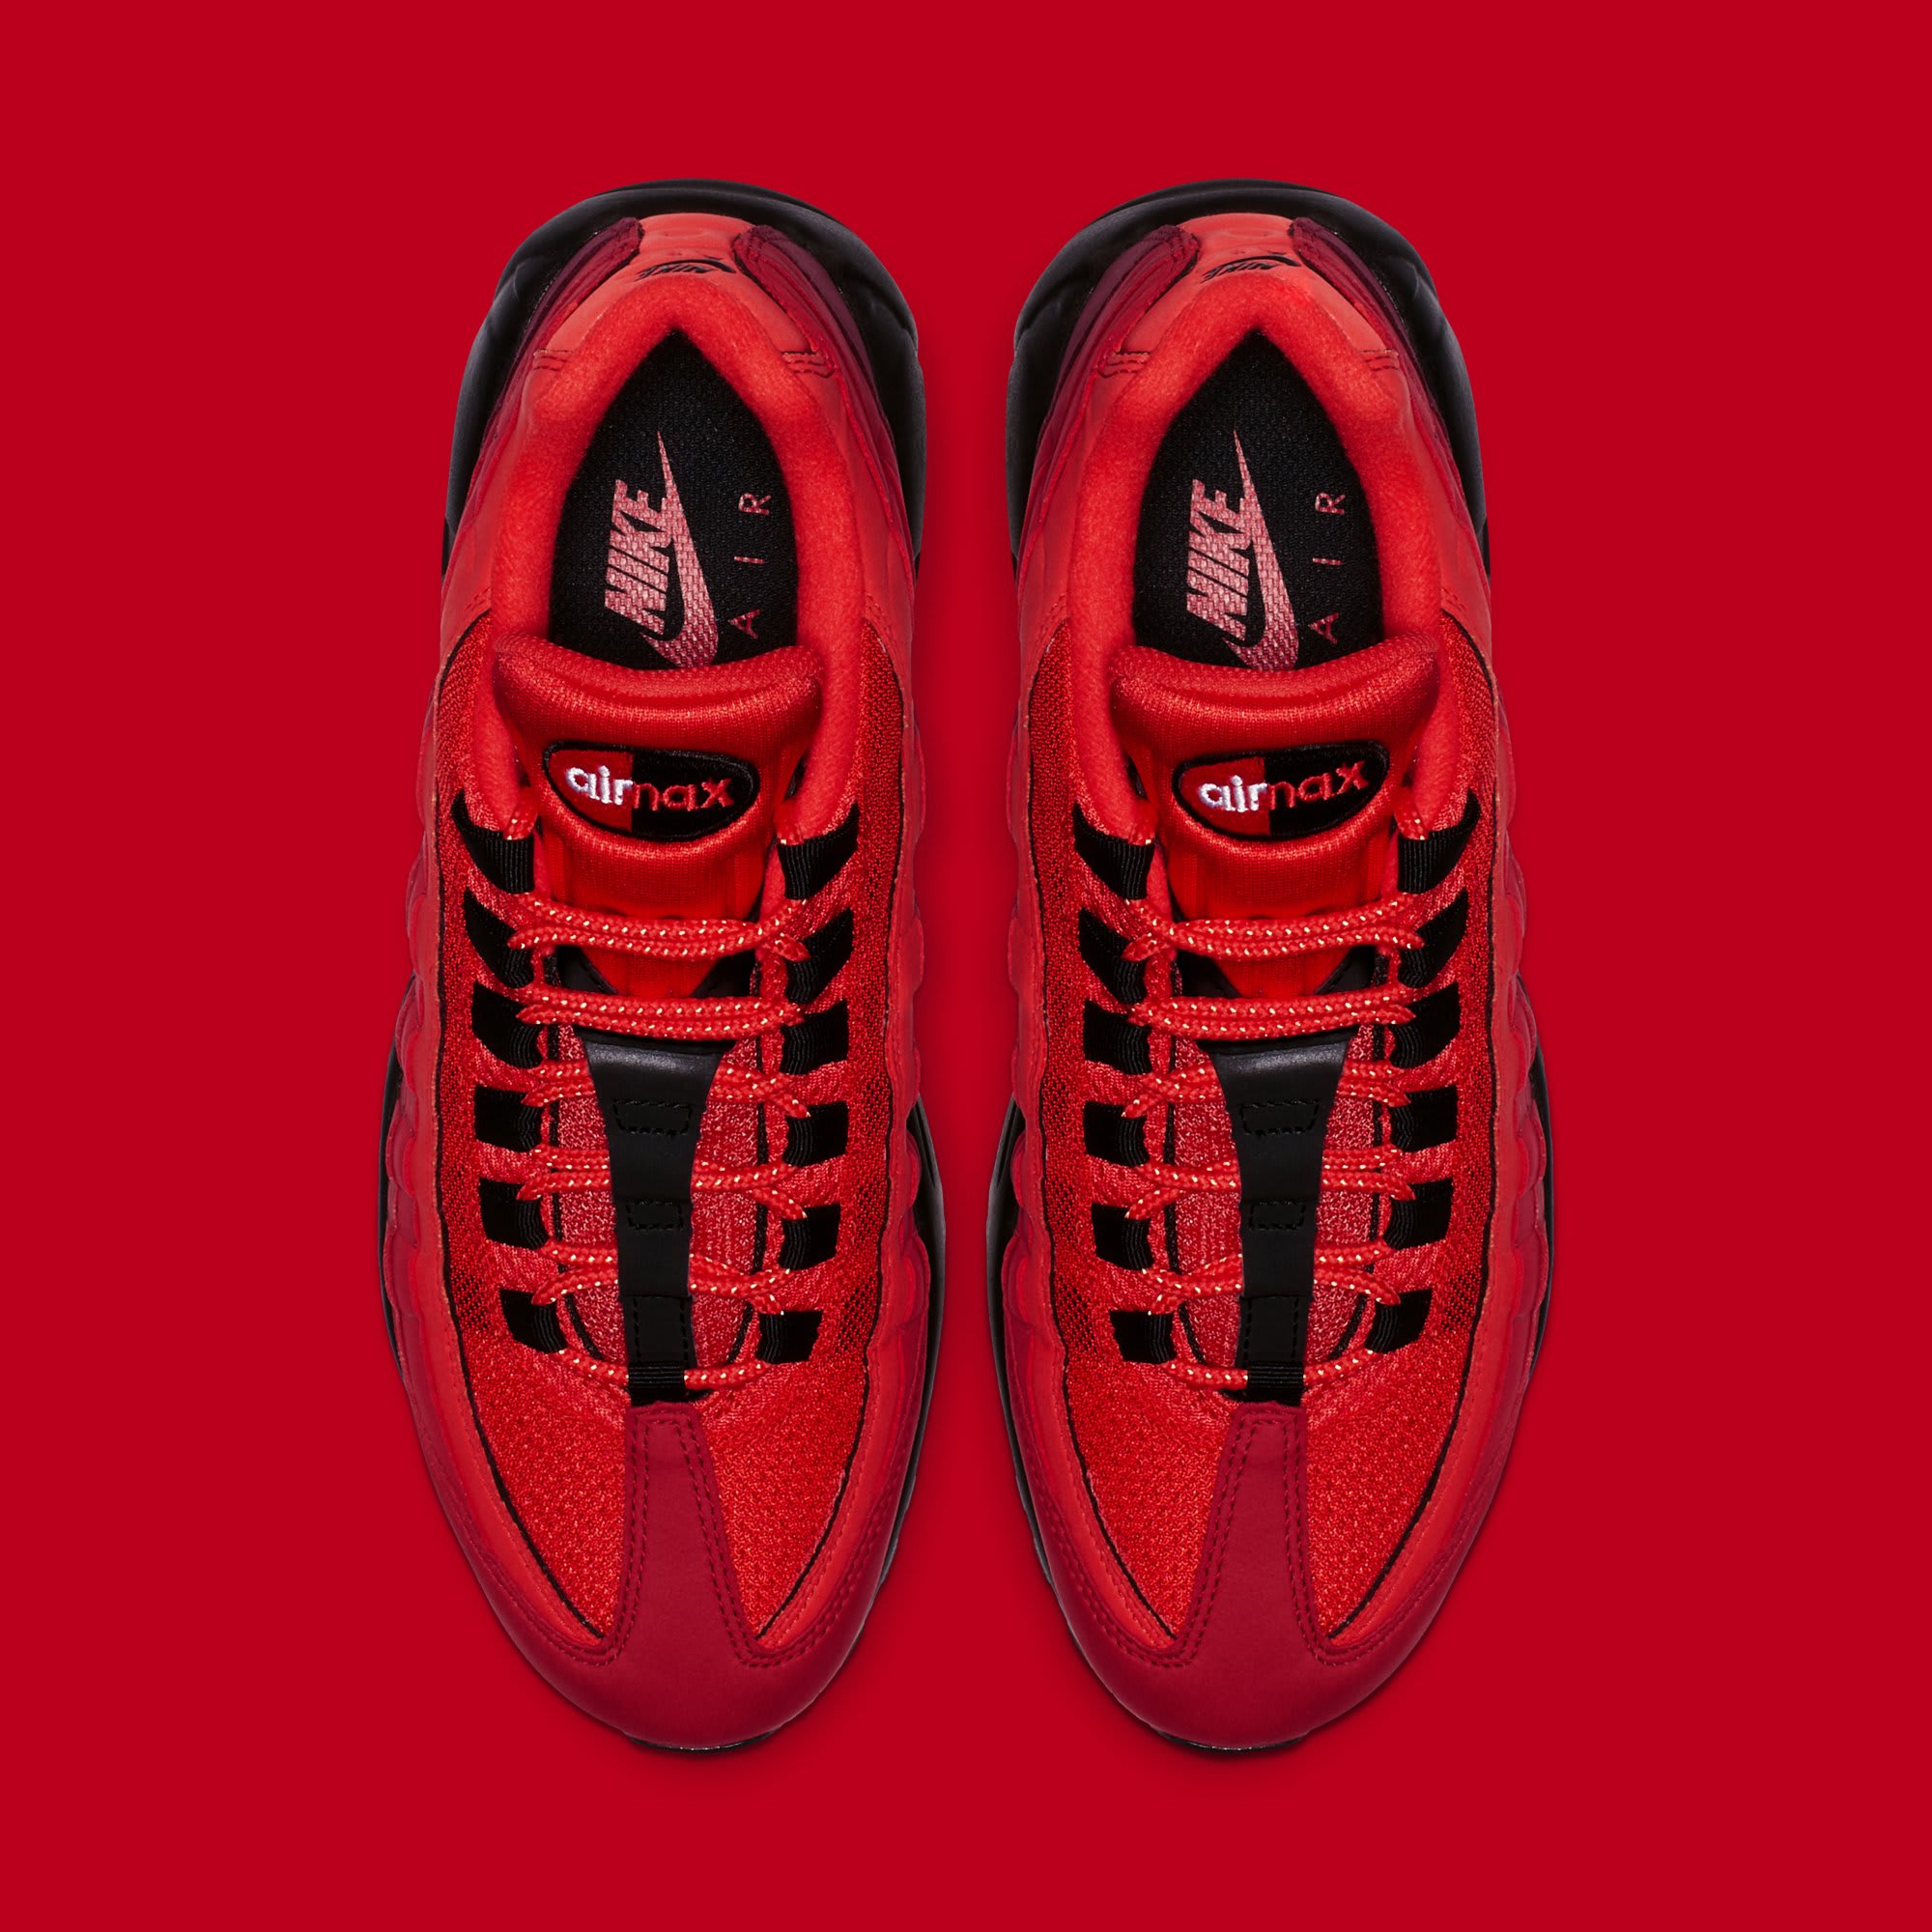 Habanero Red' Nike Air Max 95s on the Way | Complex